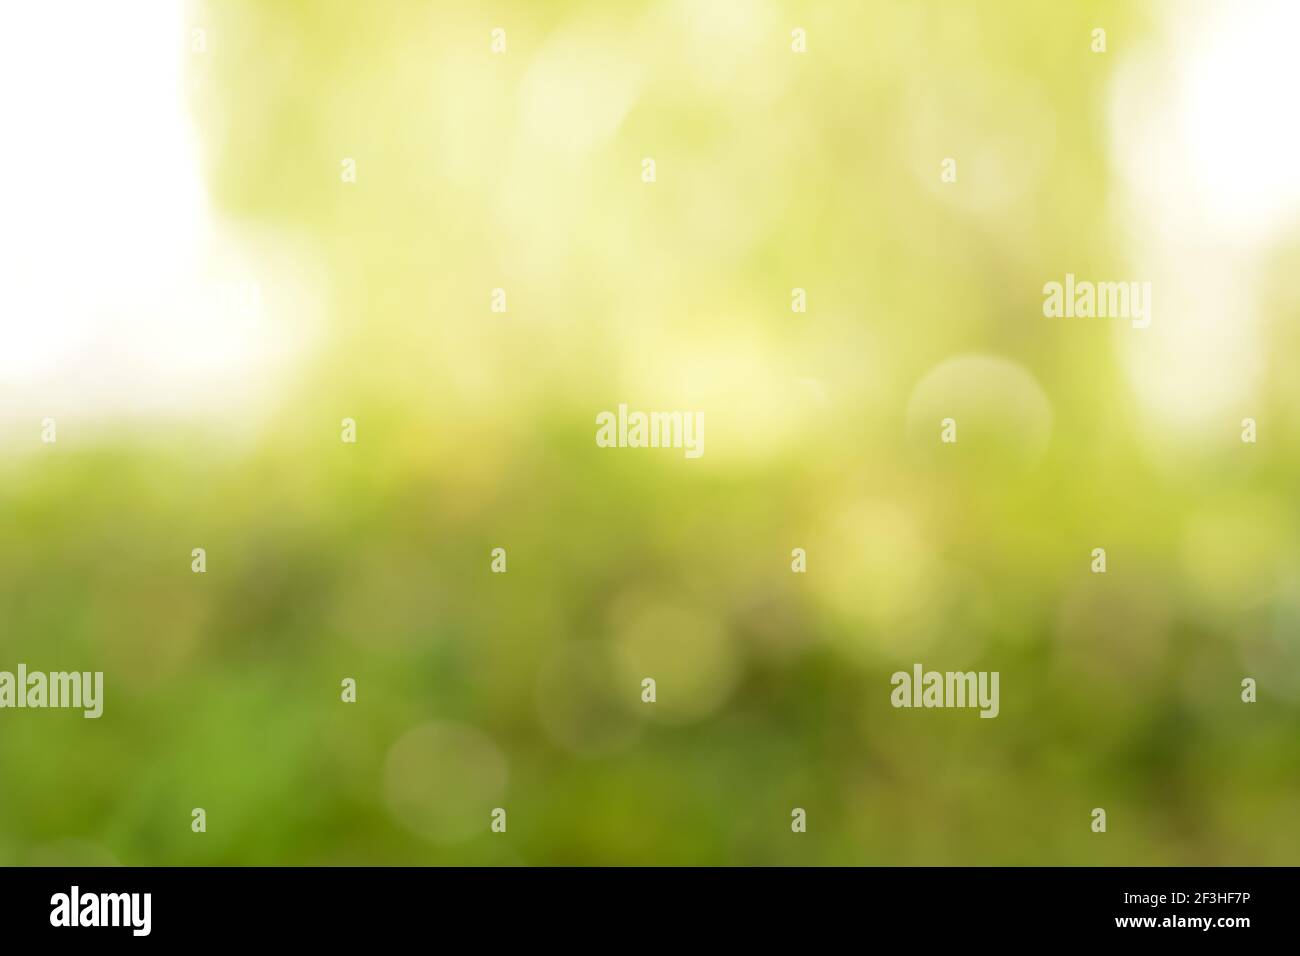 Abstract blurry yellow & green background with lens flare or bokeh effect Stock Photo